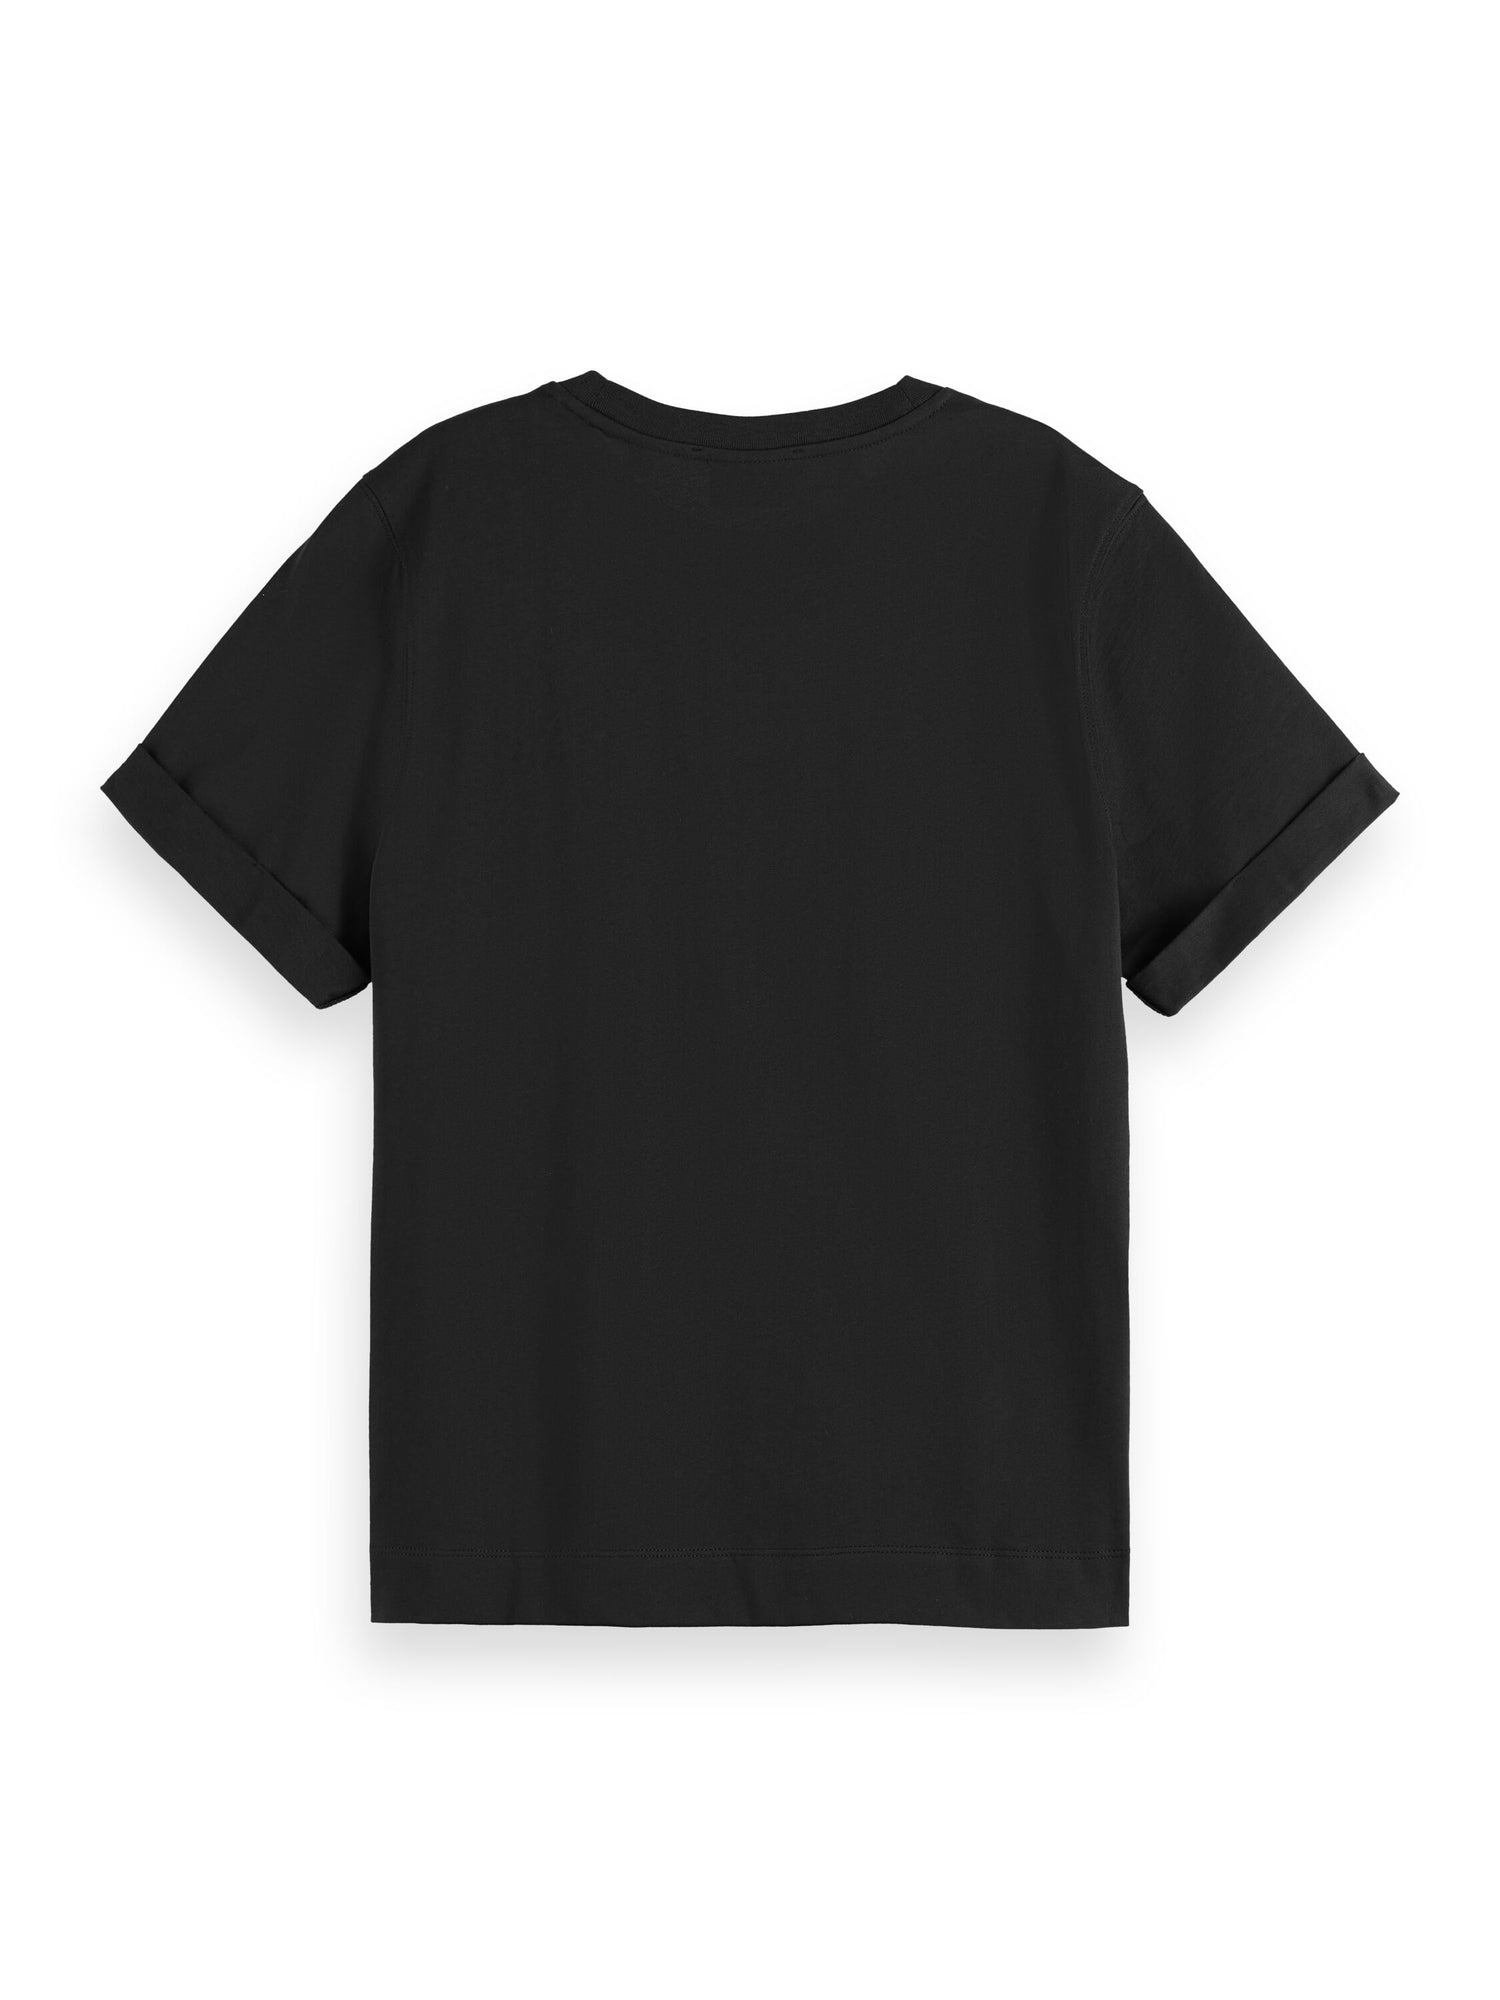 Relaxed fit T-shirt with core graphic Evening Black